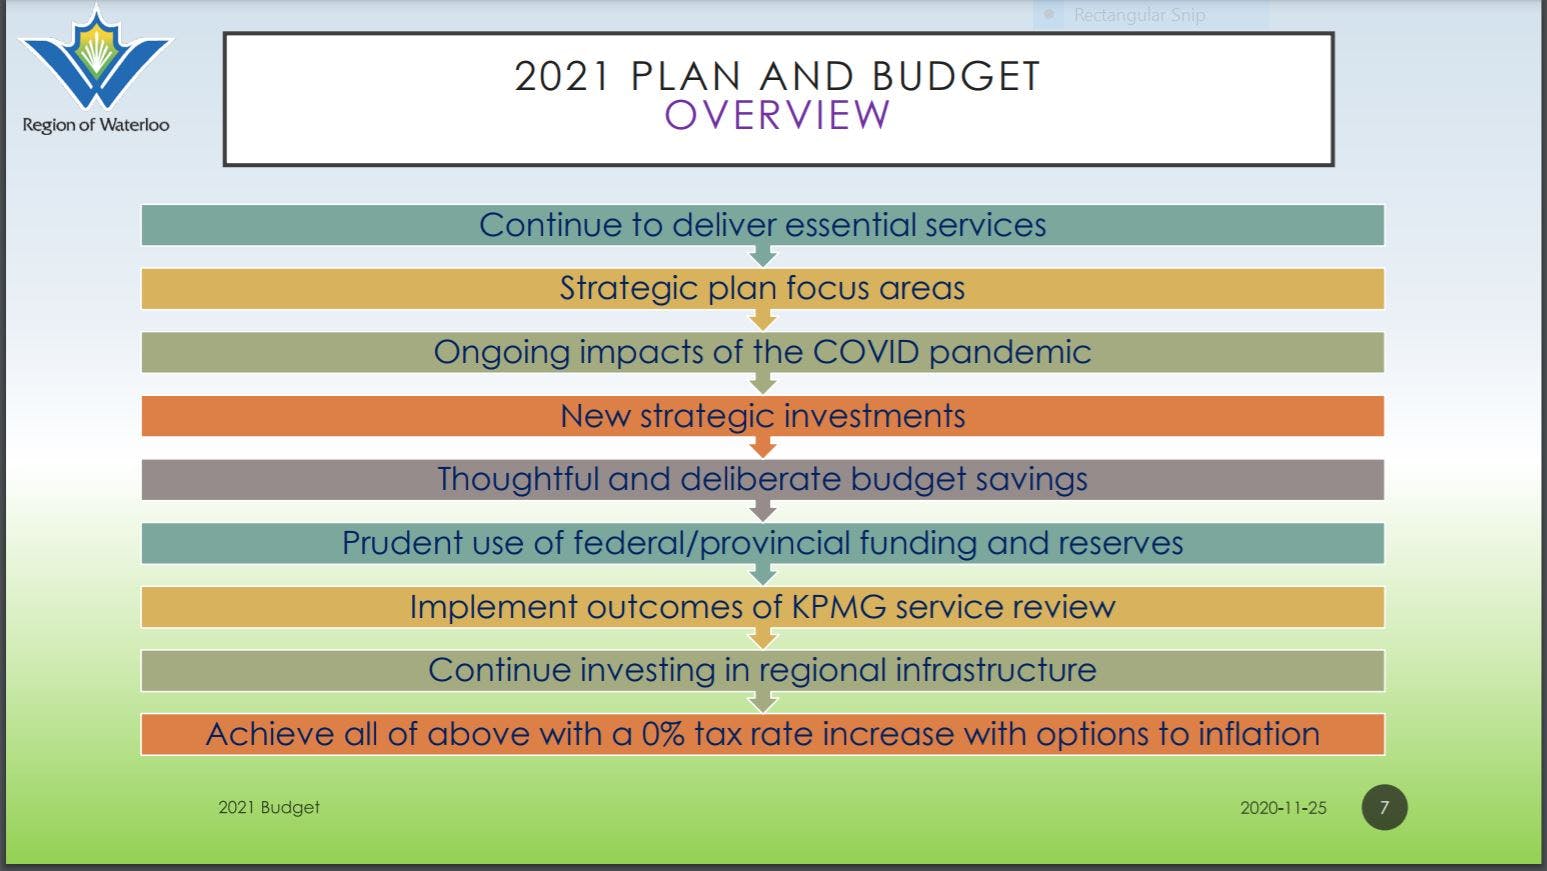 2021 Plan and Budget overview